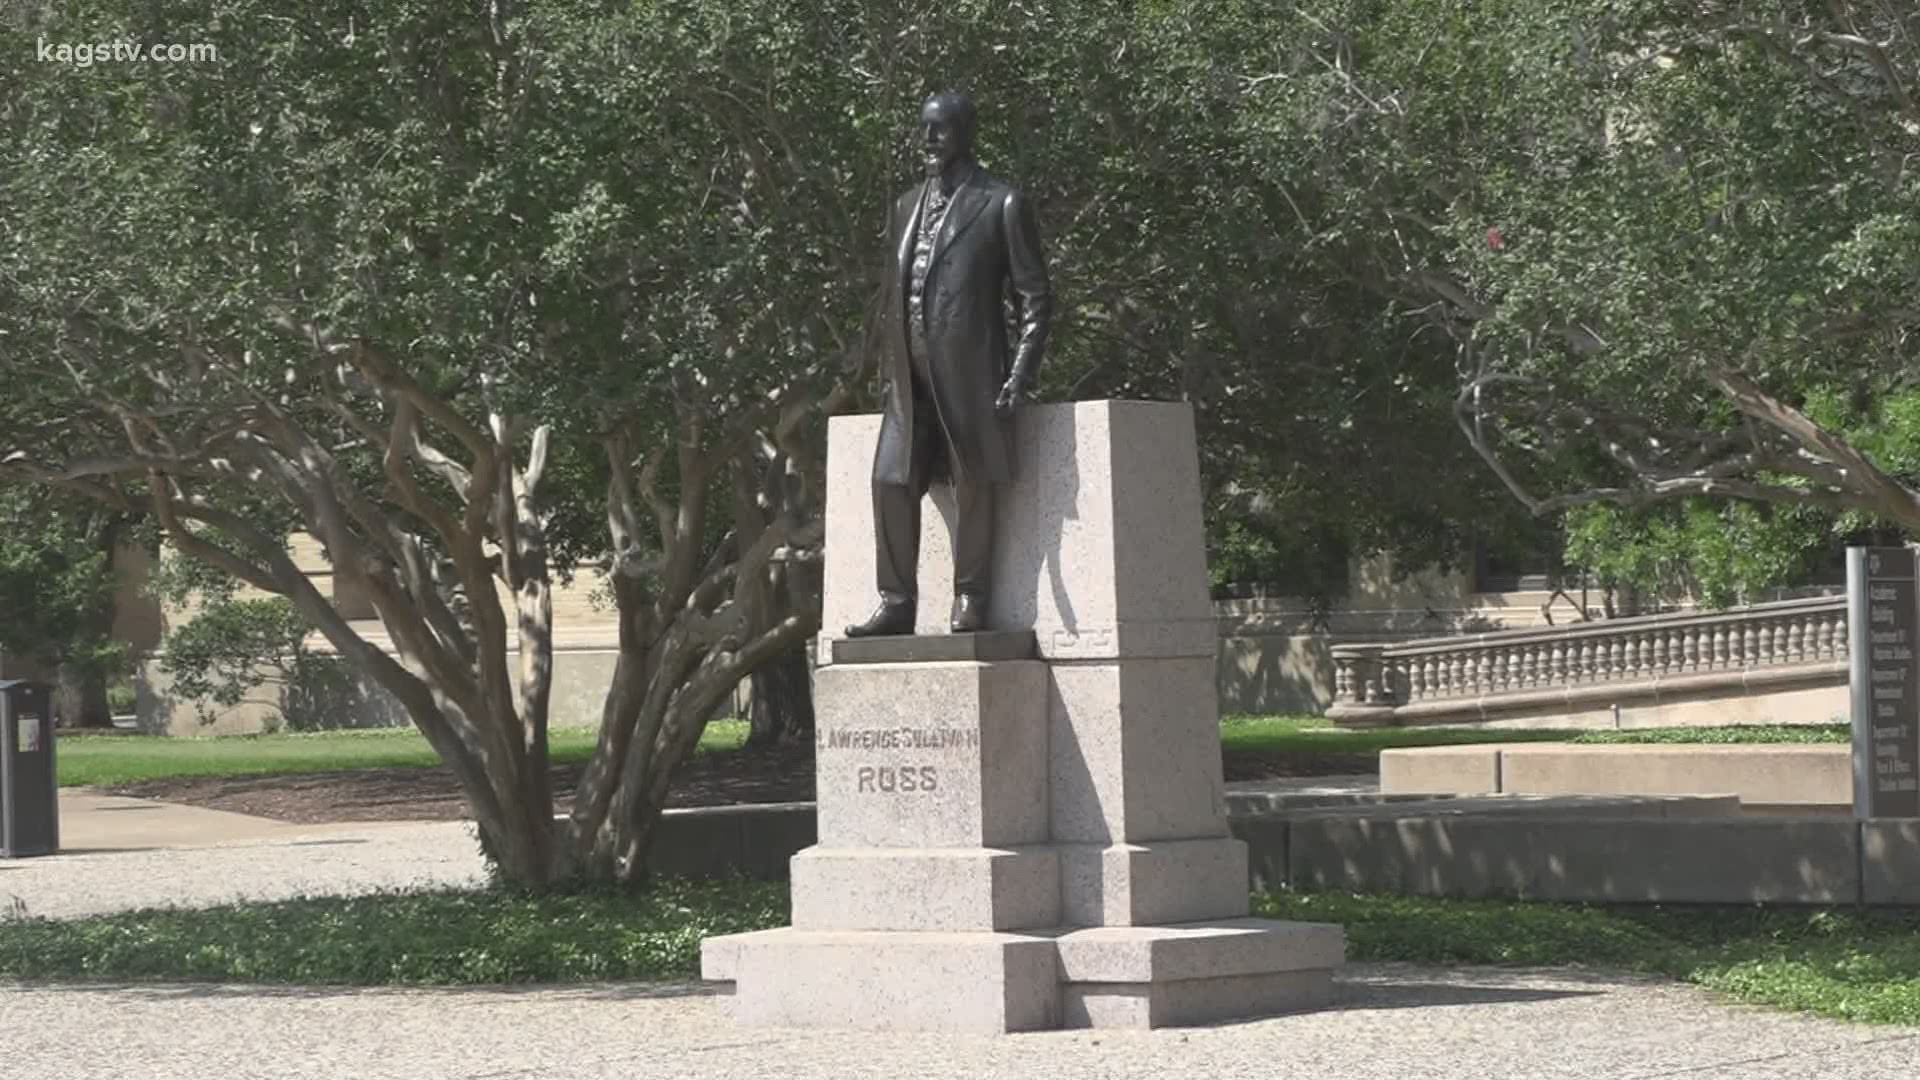 Removing History? Debate to remove Confederate statues reignited